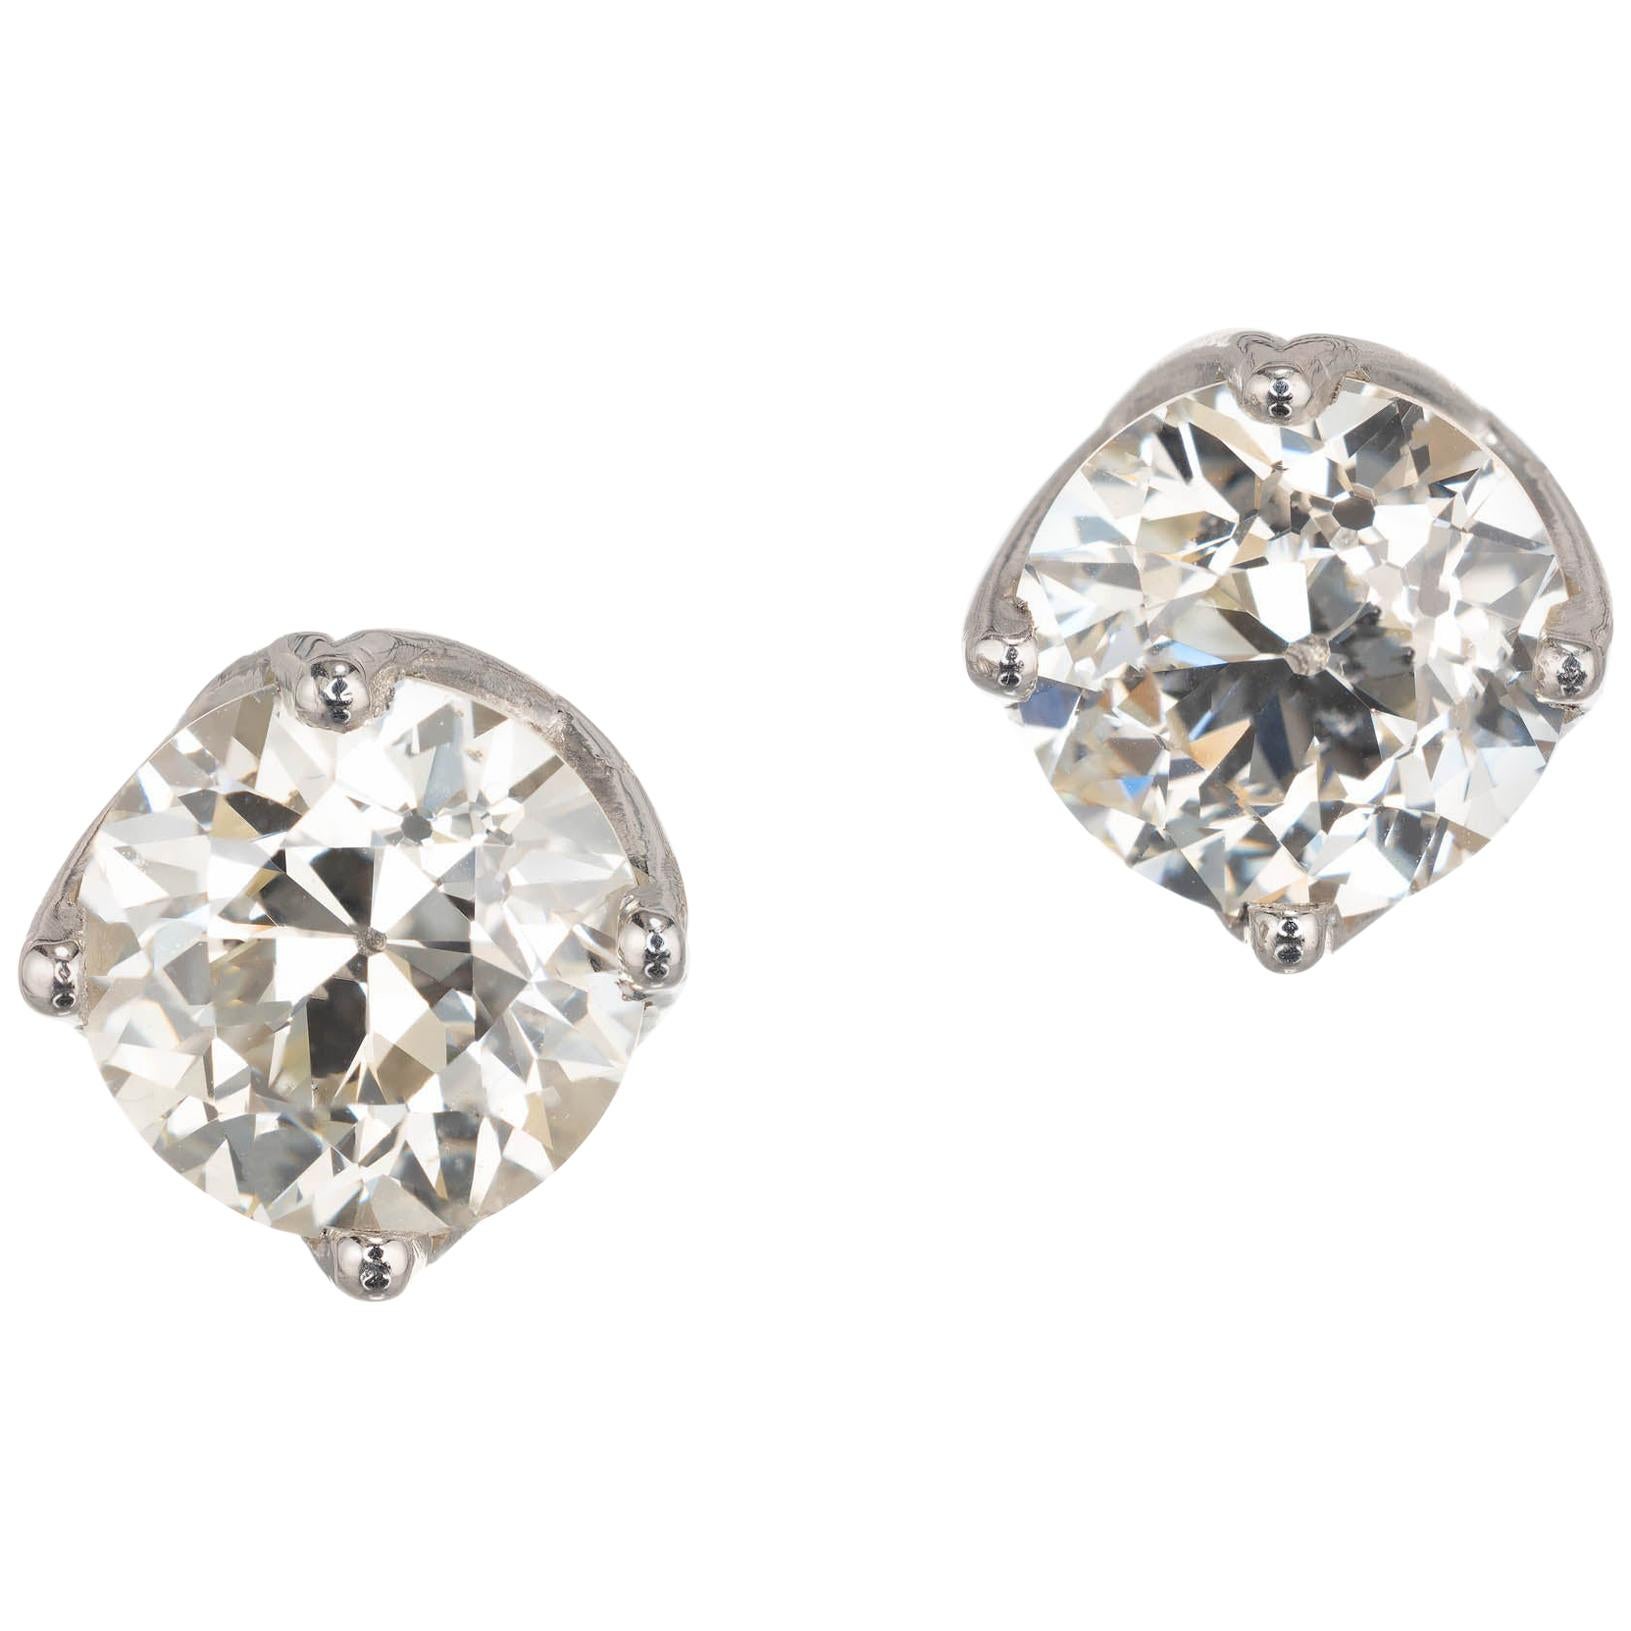 Peter Suchy GIA Certified 3.18 Carat Diamond Platinum Stud Earrings For Sale